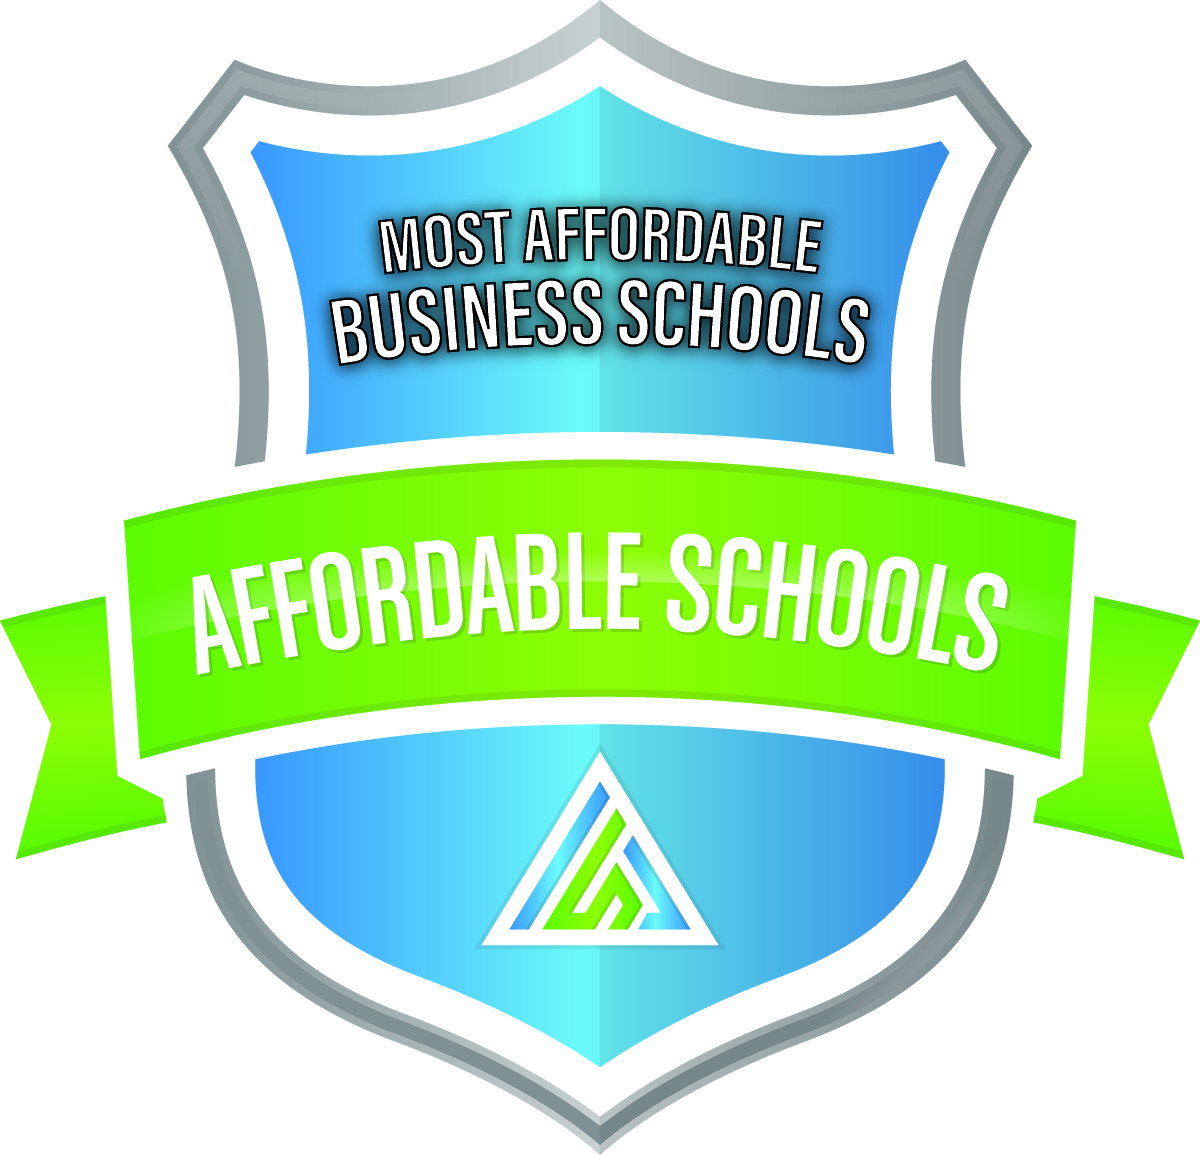 The 50 Best Affordable Business Schools 2020 - Affordable Schools